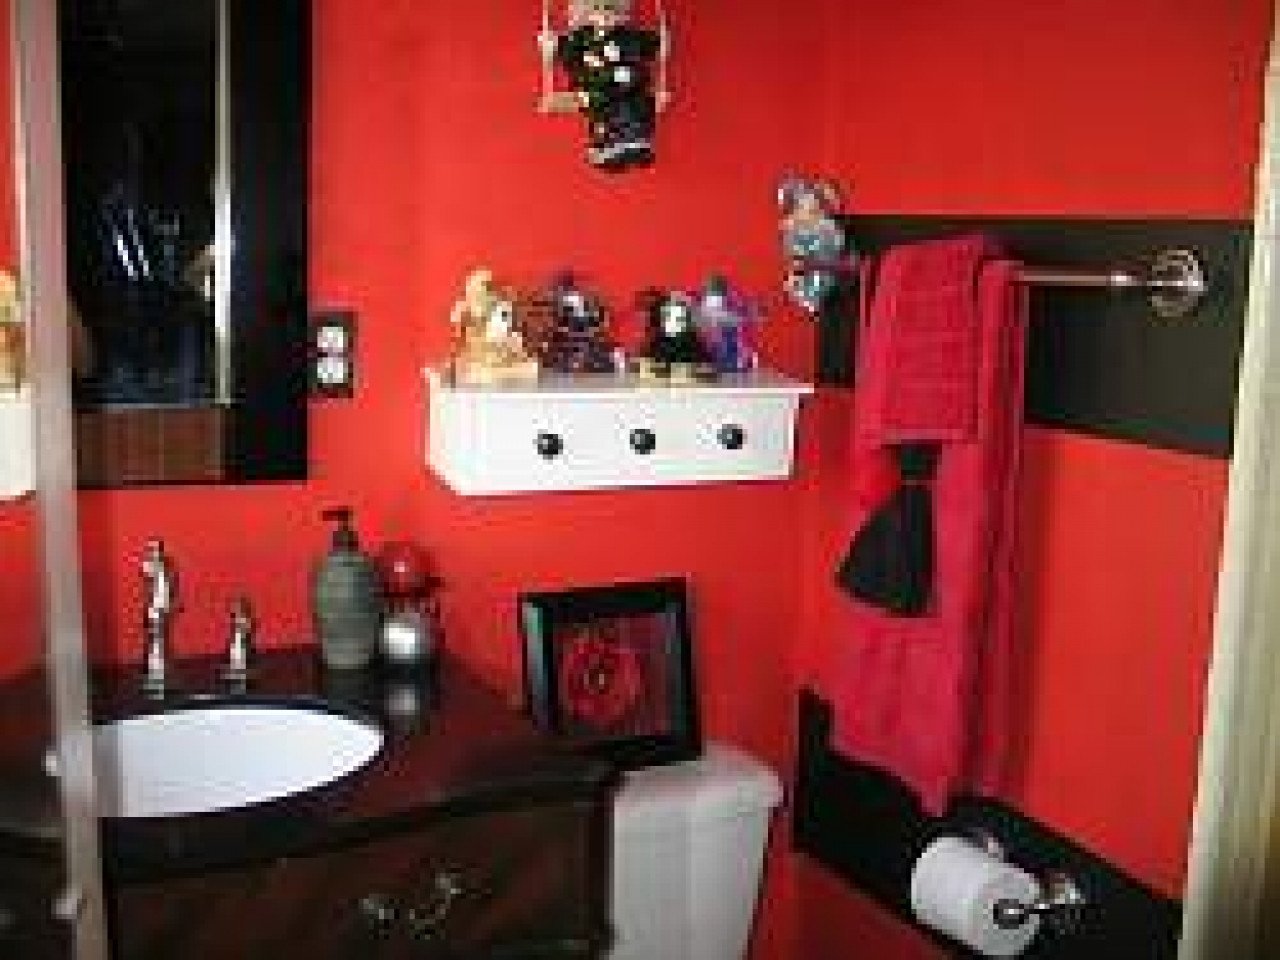 Red and Black Bathroom Decor Elegant Red and Black Bathroom Decor Red and Black Bathroom Decorating Ideas Red and Black Bathroom